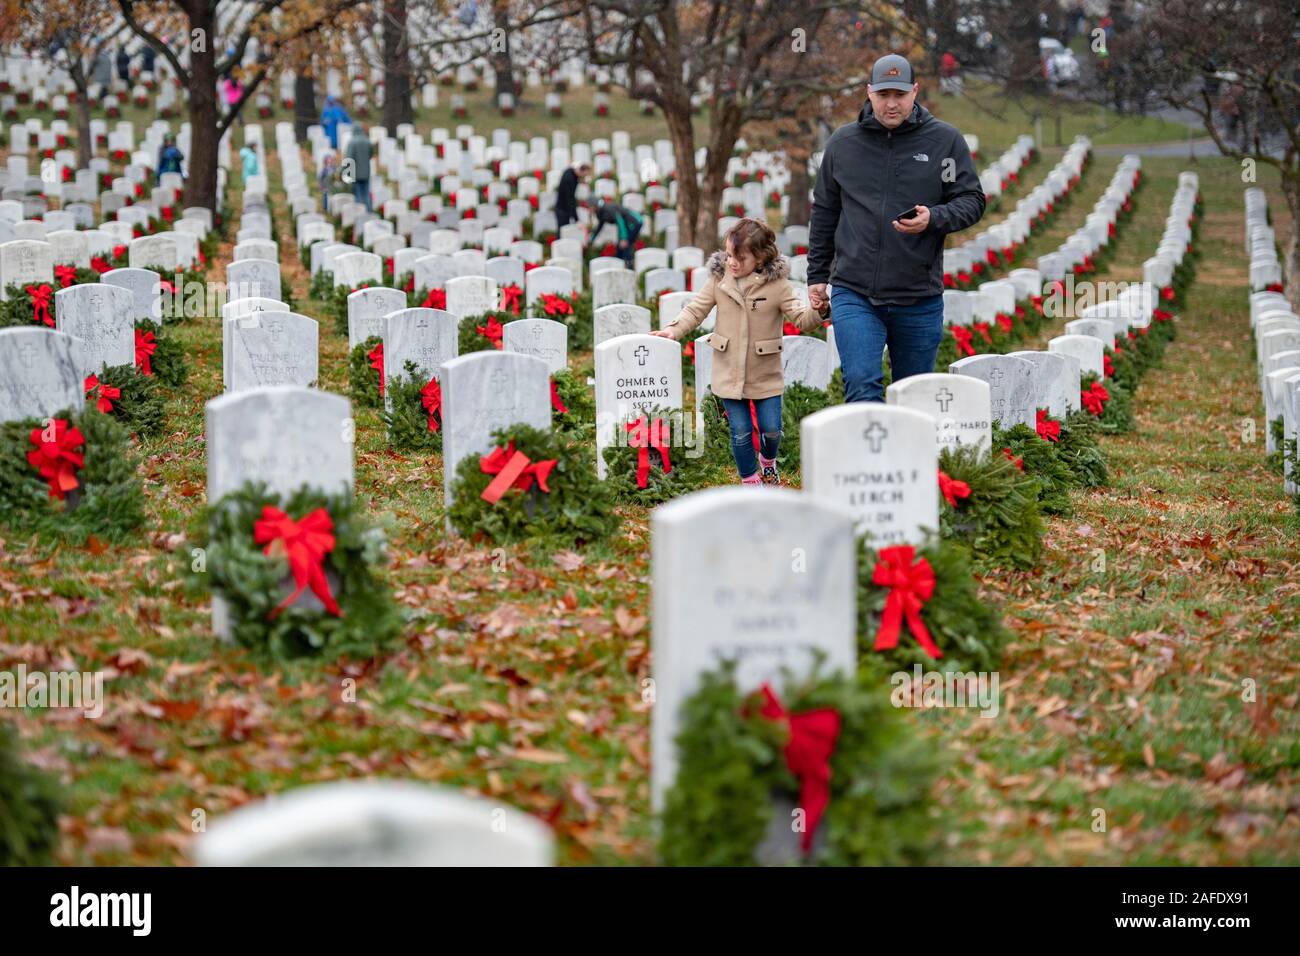 Arlington, United States of America. 14 December, 2019. Family members walk past gravesites of fallen service members marked by wreaths during the 28th Wreaths Across America Day at Arlington National Cemetery December 14, 2019 in Arlington, Virginia. More than 38,000 volunteers place wreaths at every gravesite at Arlington National Cemetery and other sites around the nation.  Credit: Elizabeth Fraser/DOD/Alamy Live News Stock Photo